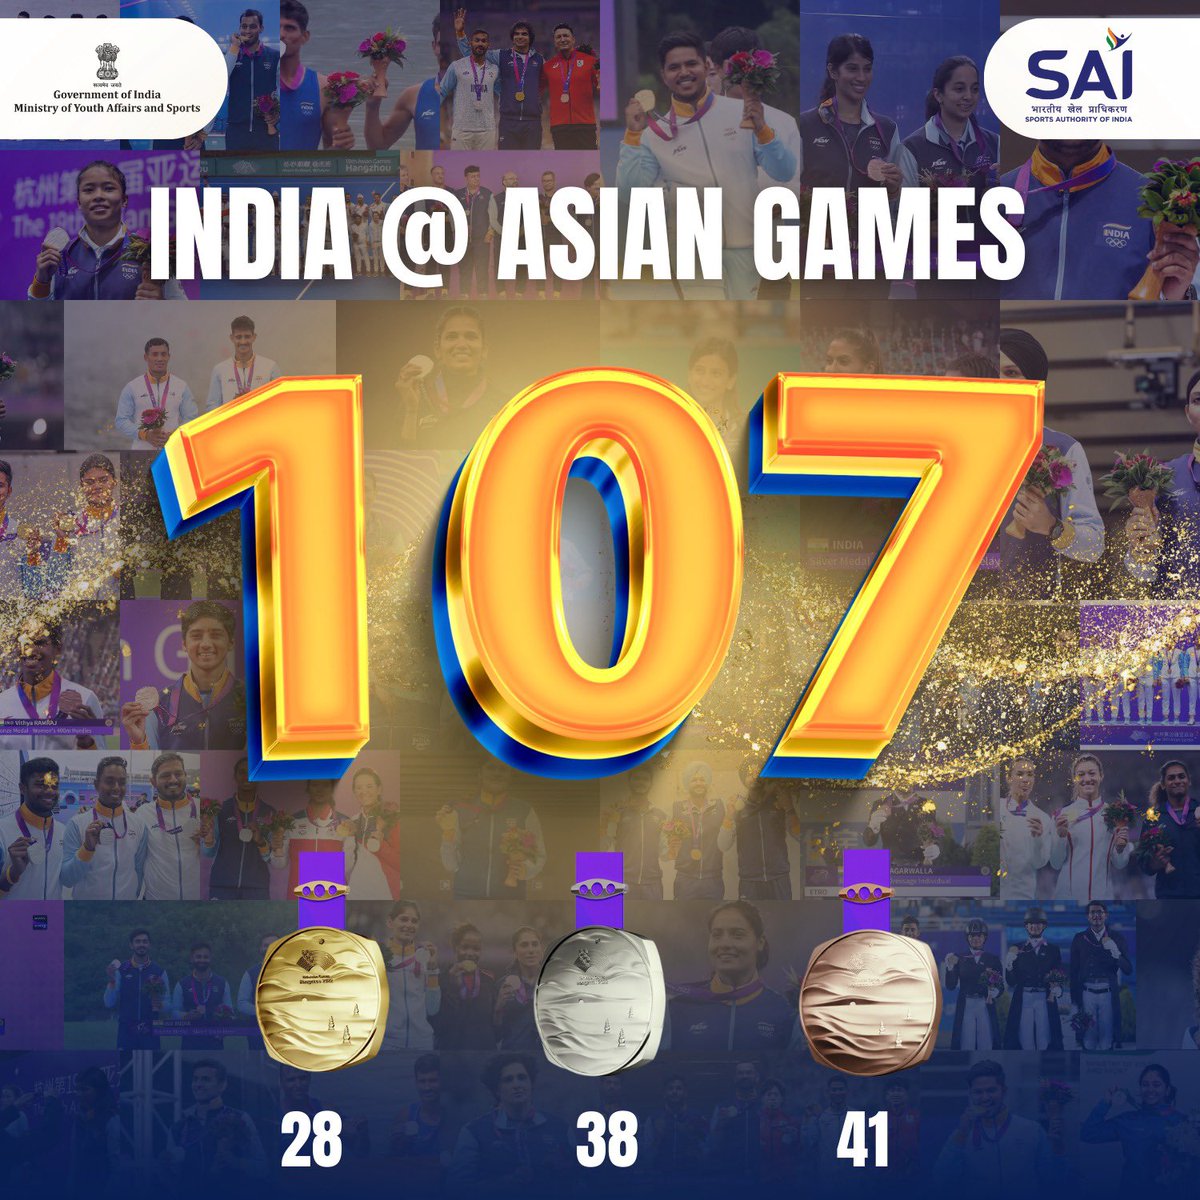 What a historic achievement for India at the Asian Games! The entire nation is overjoyed that our incredible athletes have brought home the highest ever total of 107 medals, the best ever performance in the last 60 years. The unwavering determination, relentless spirit and hard